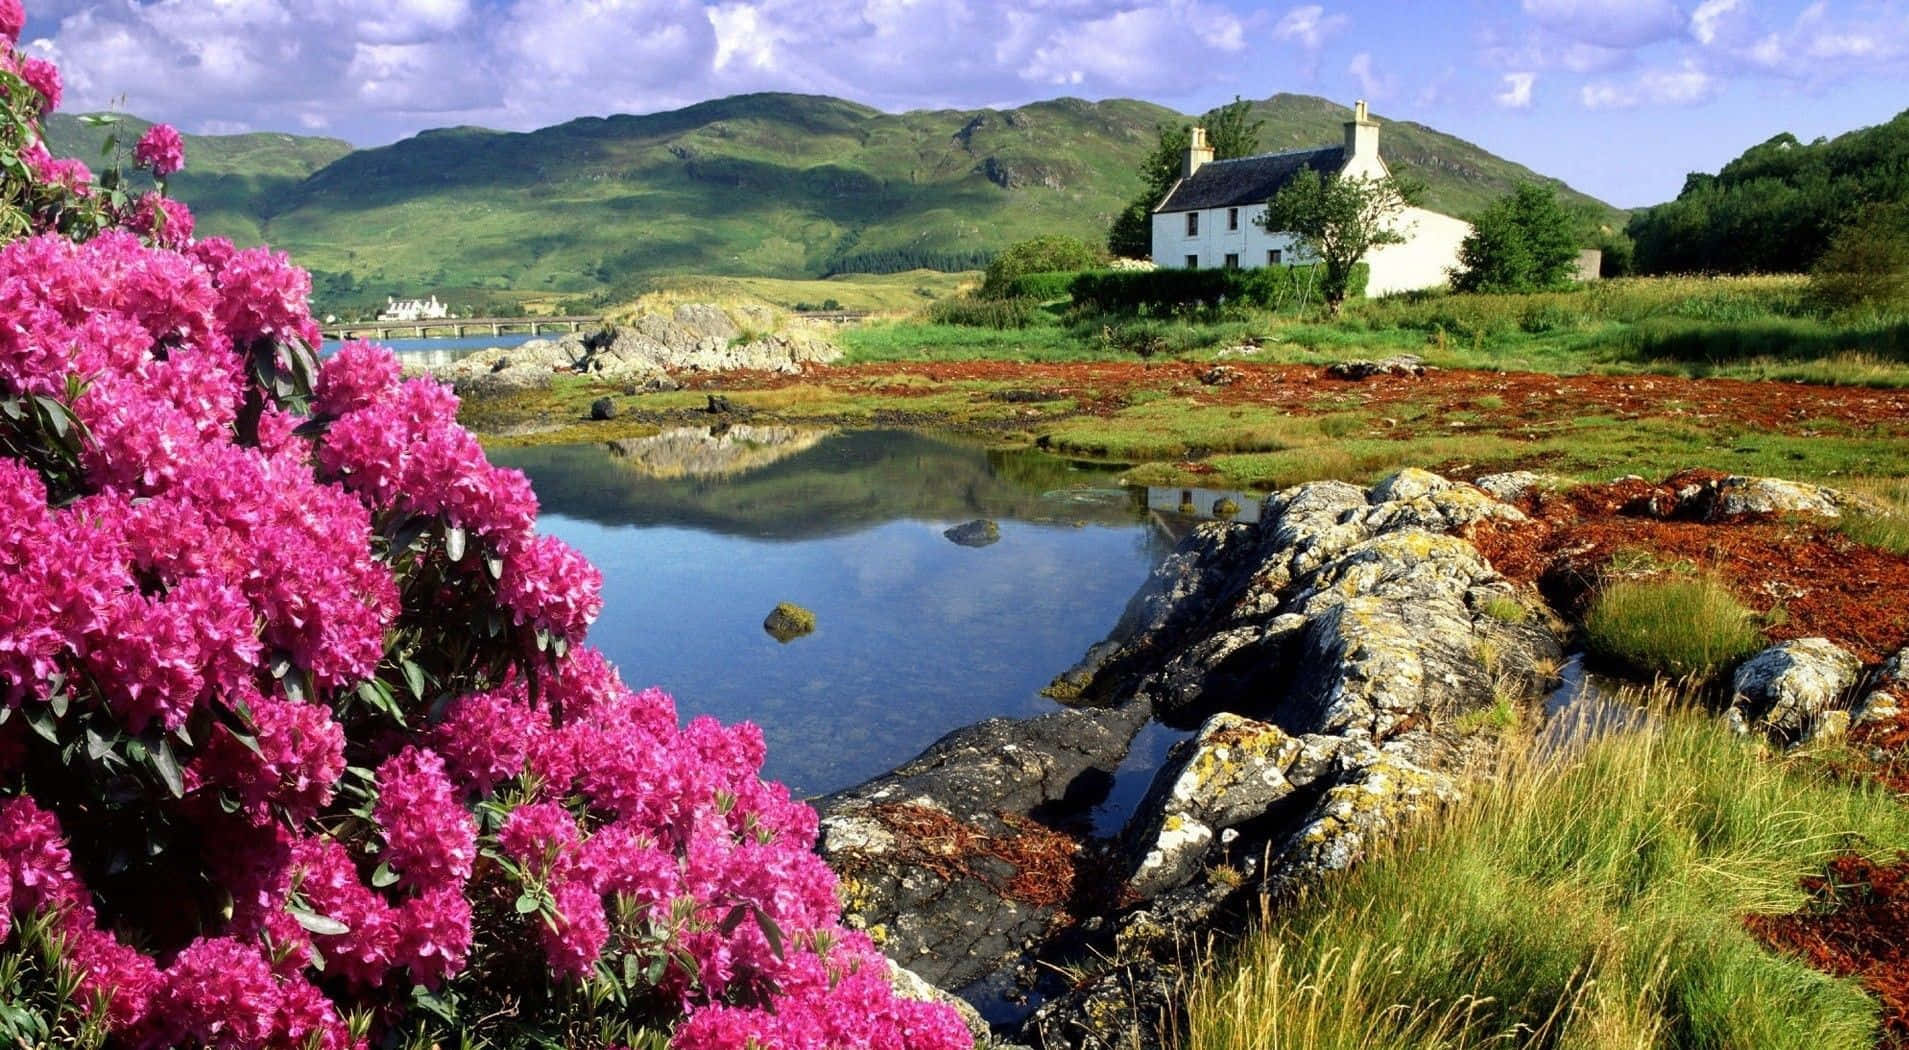 A House And Flowers In The Background